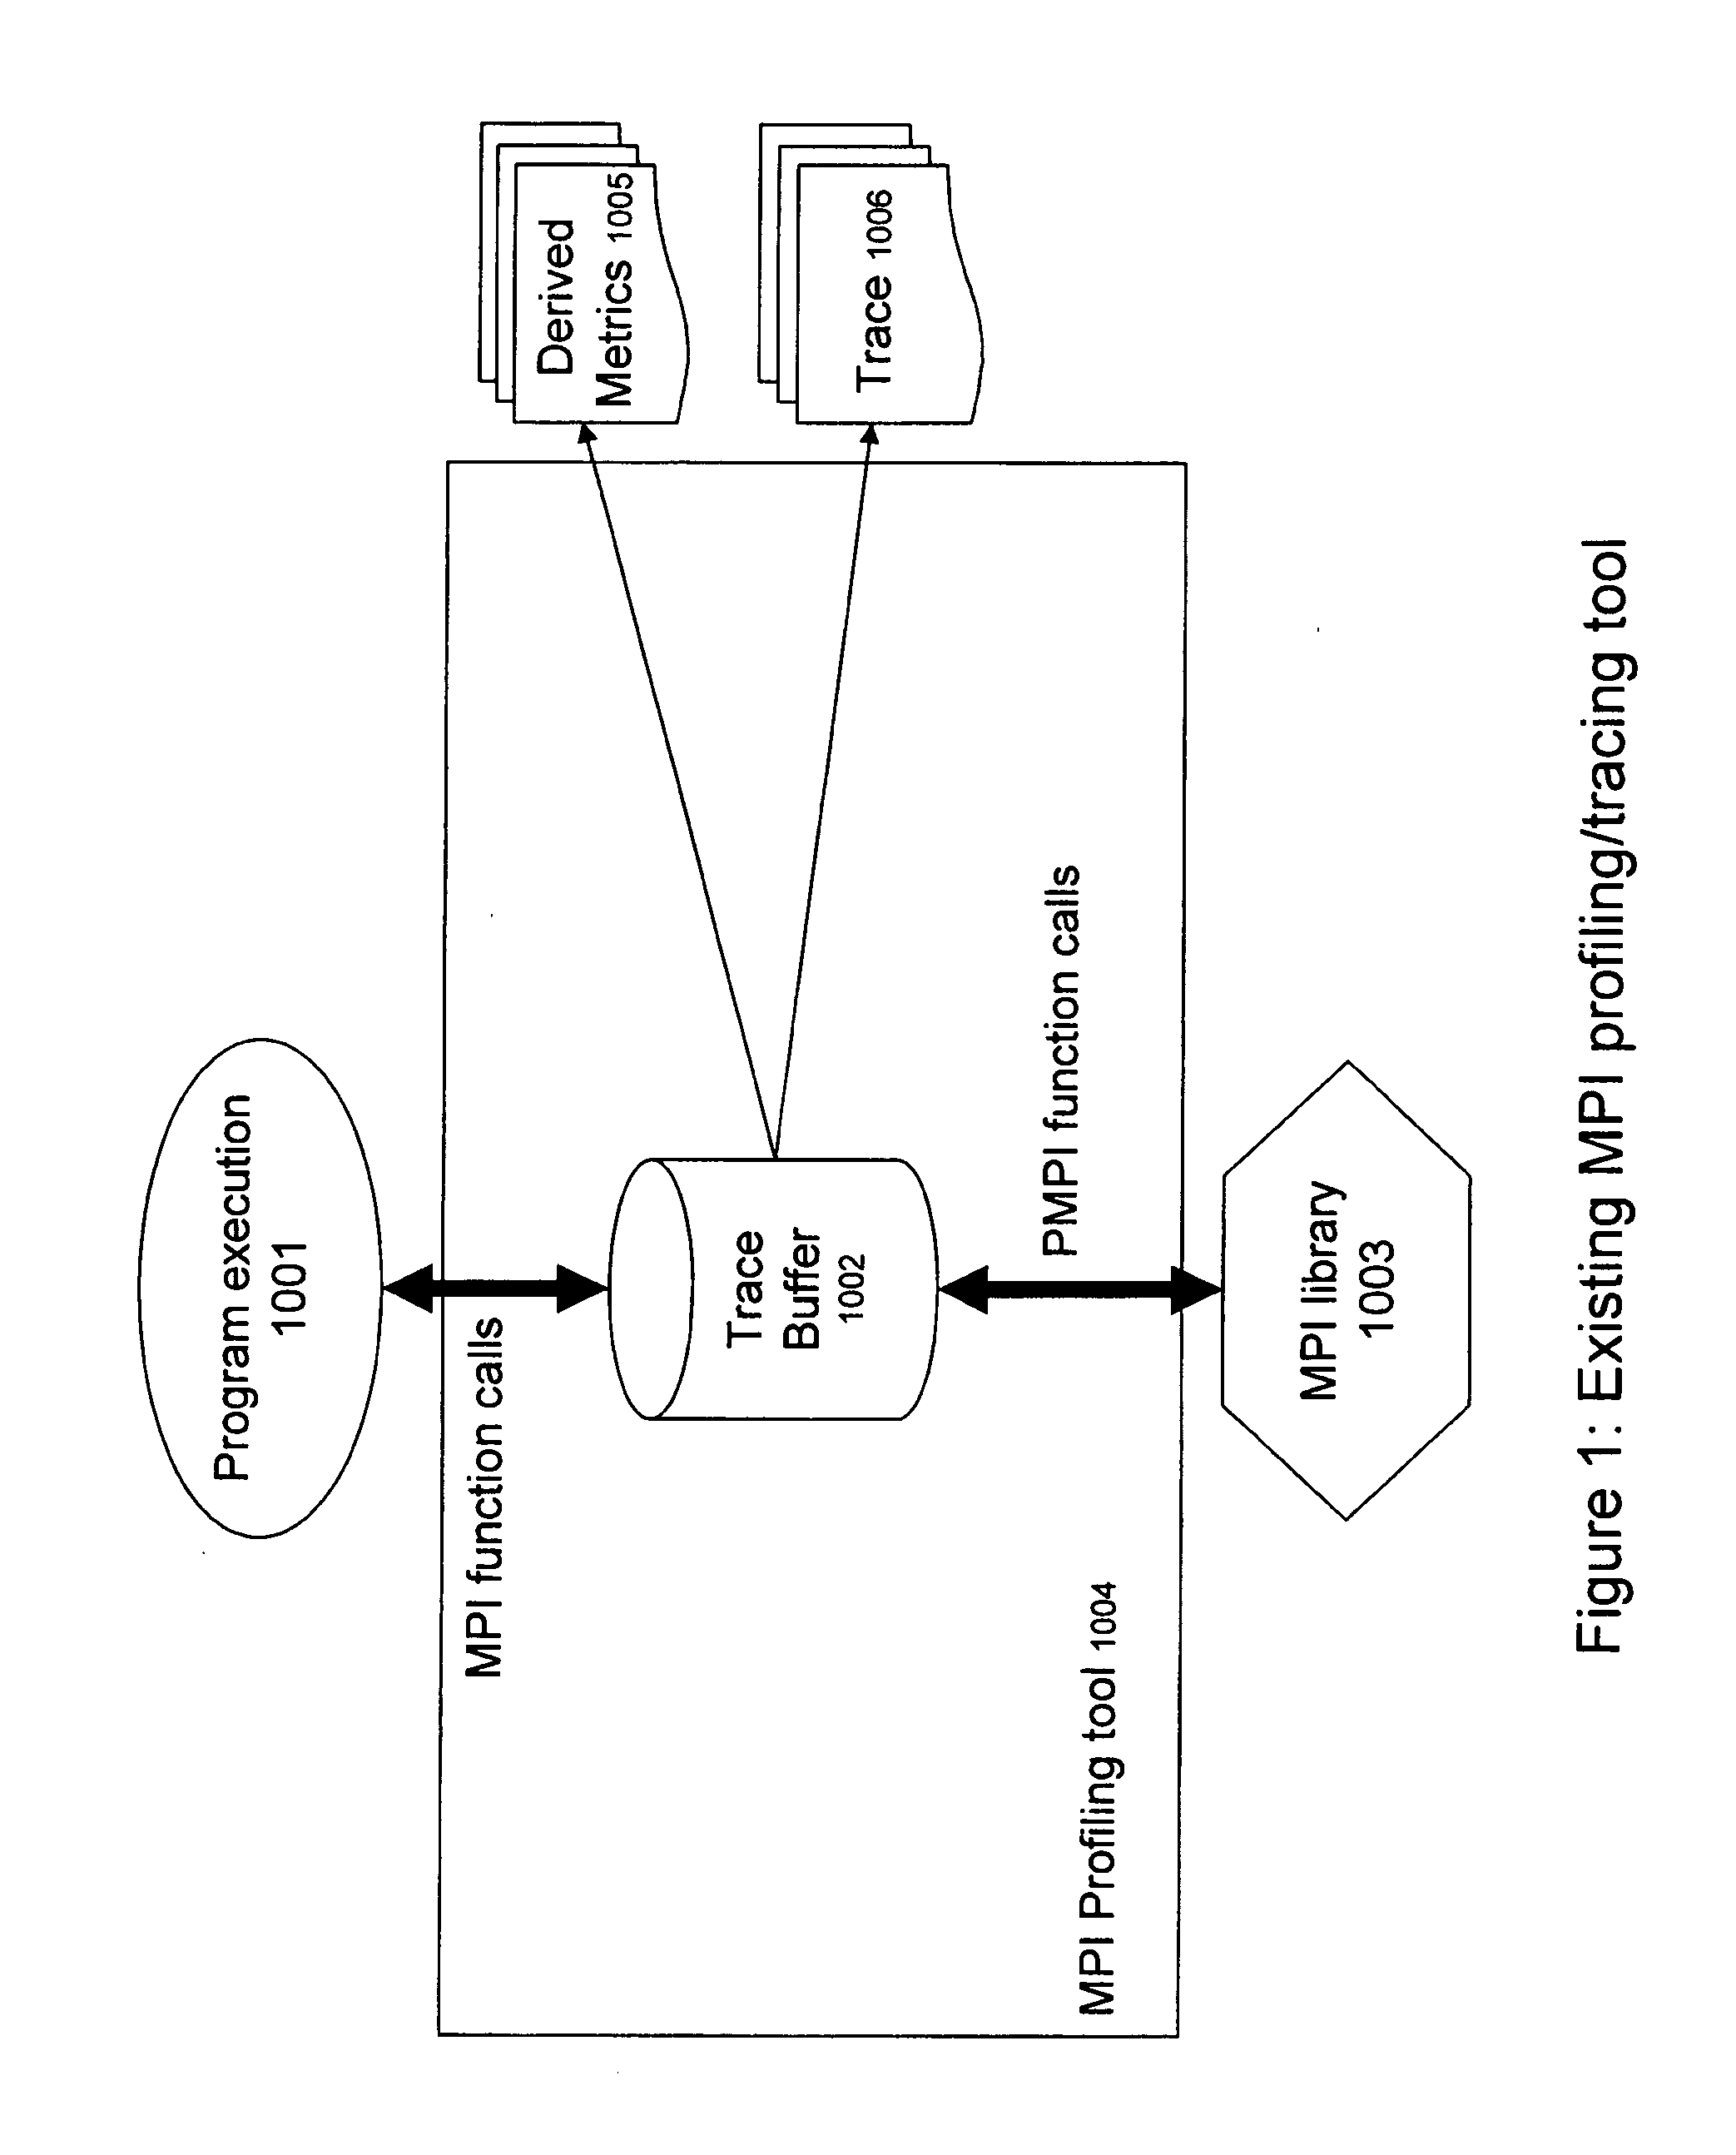 Binary programmable method for application performance data collection